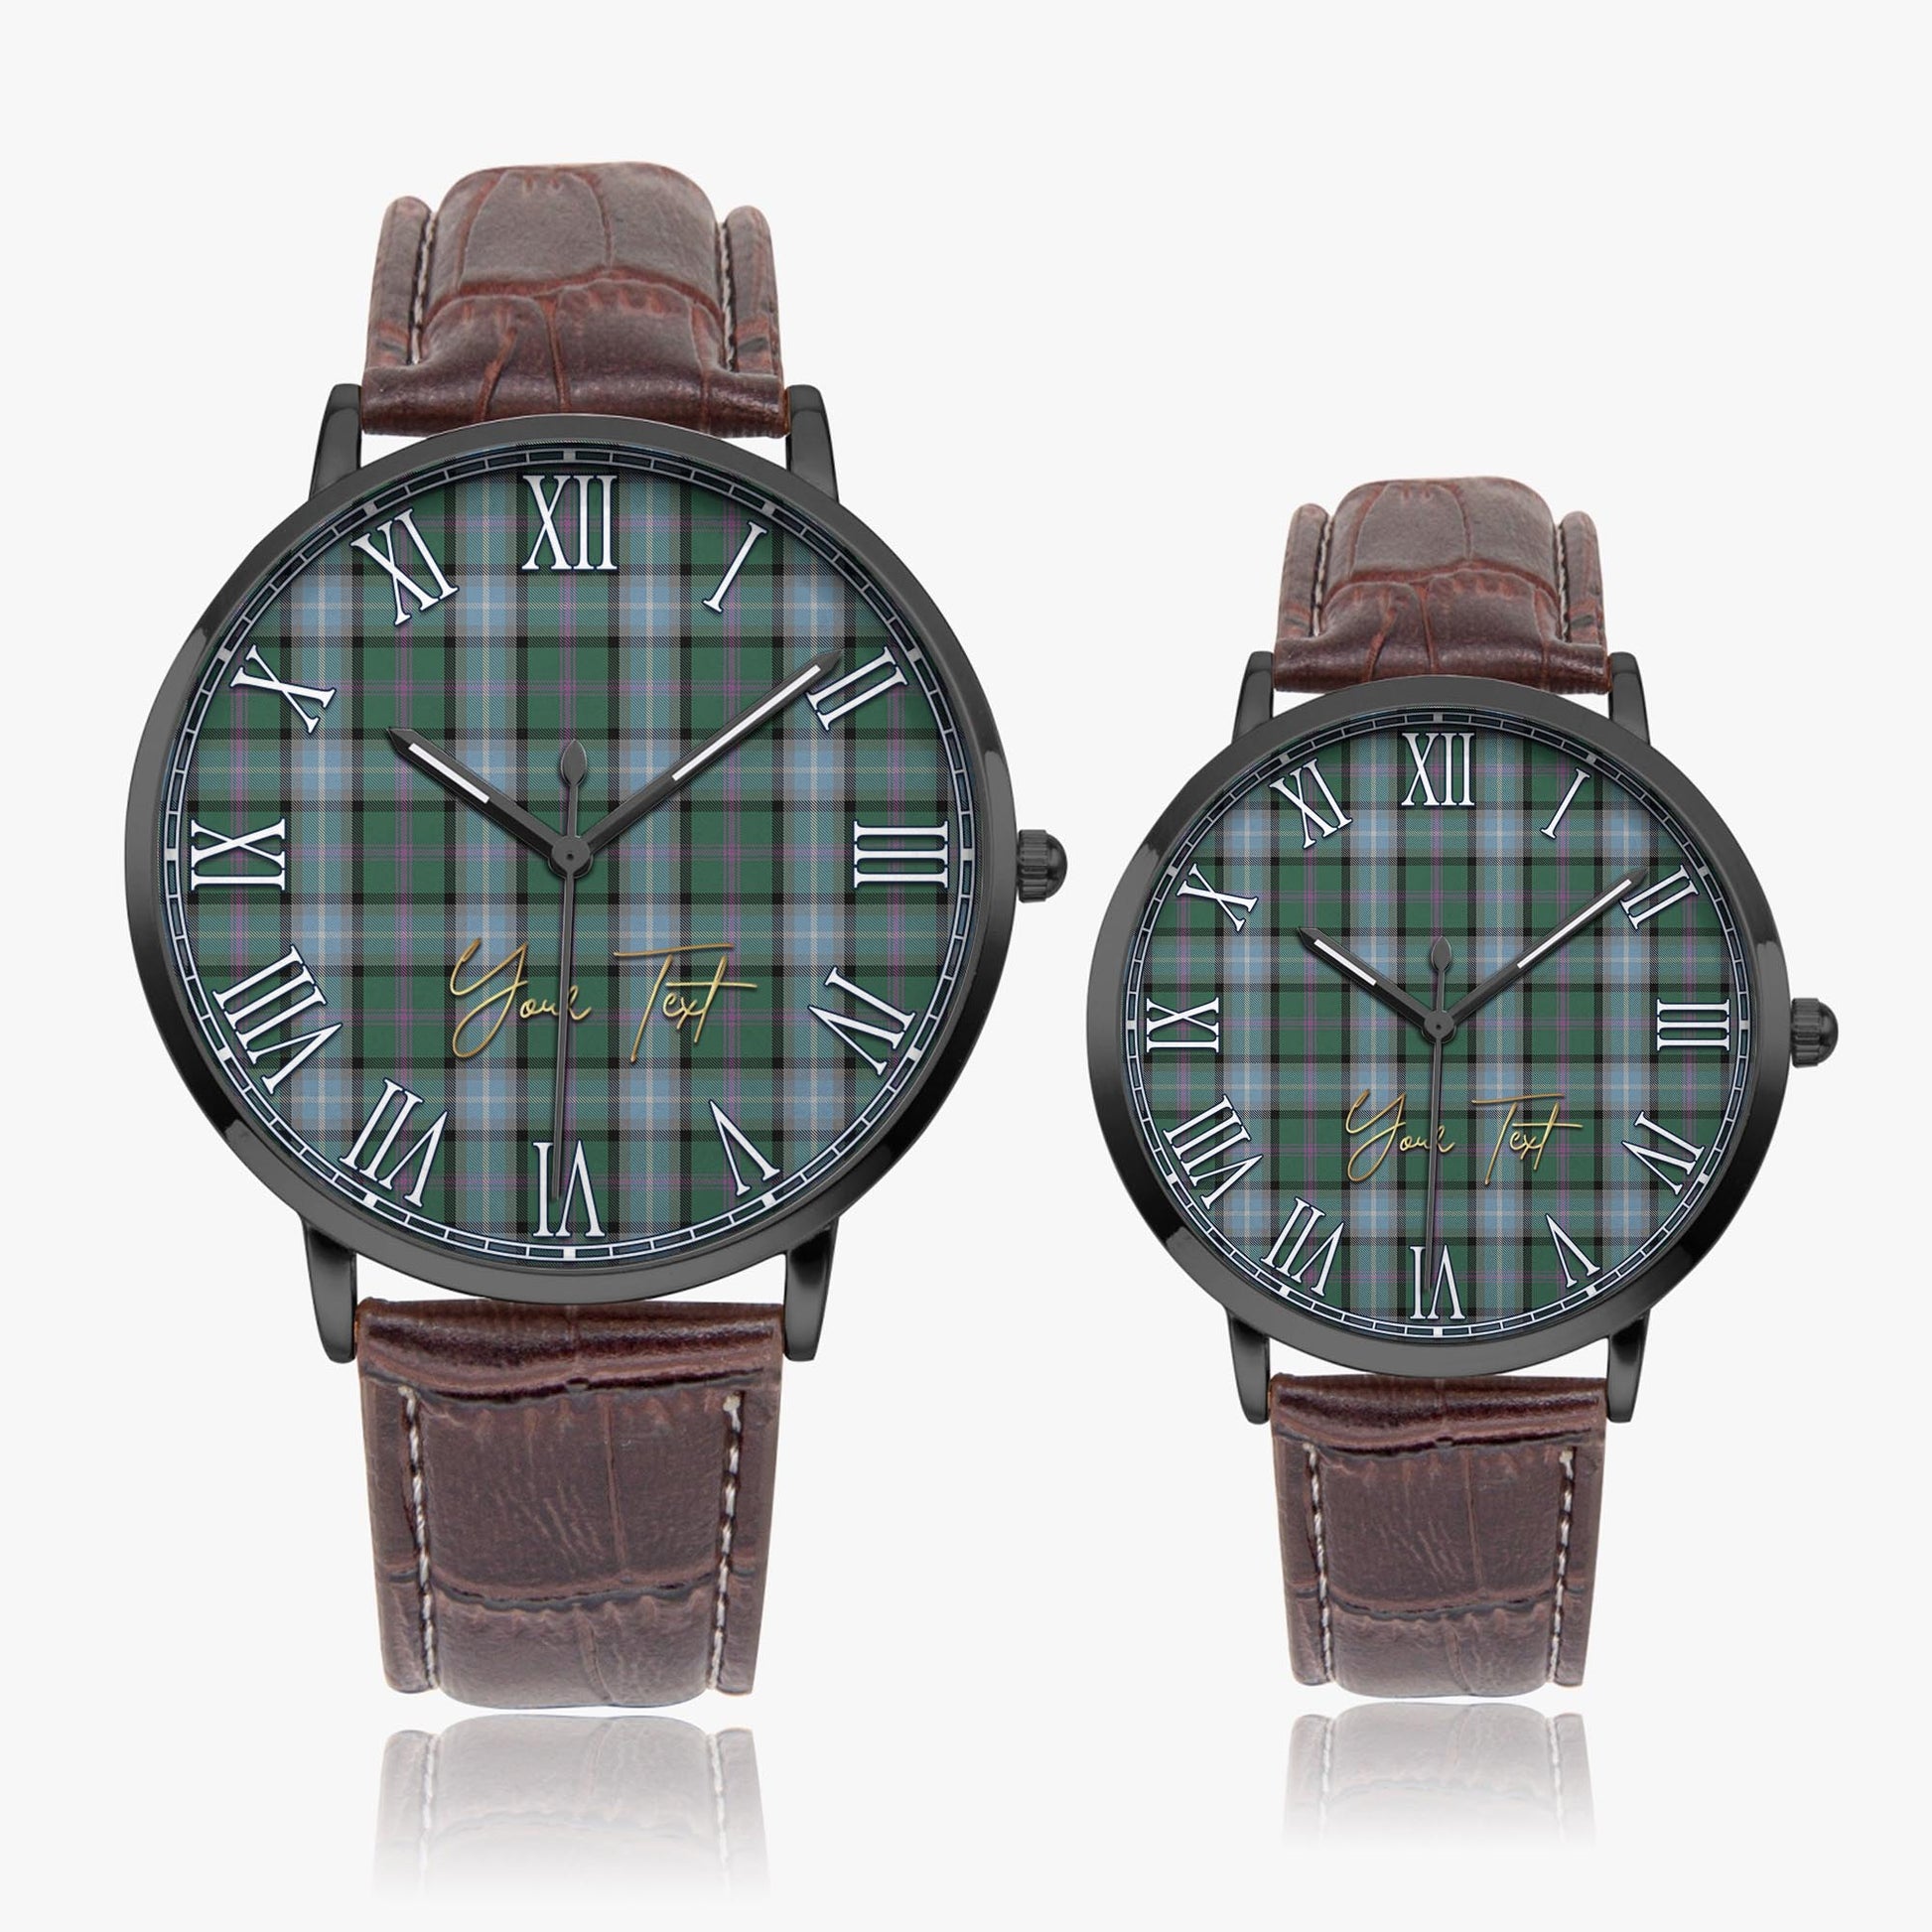 Alexander of Menstry Hunting Tartan Personalized Your Text Leather Trap Quartz Watch Ultra Thin Black Case With Brown Leather Strap - Tartanvibesclothing